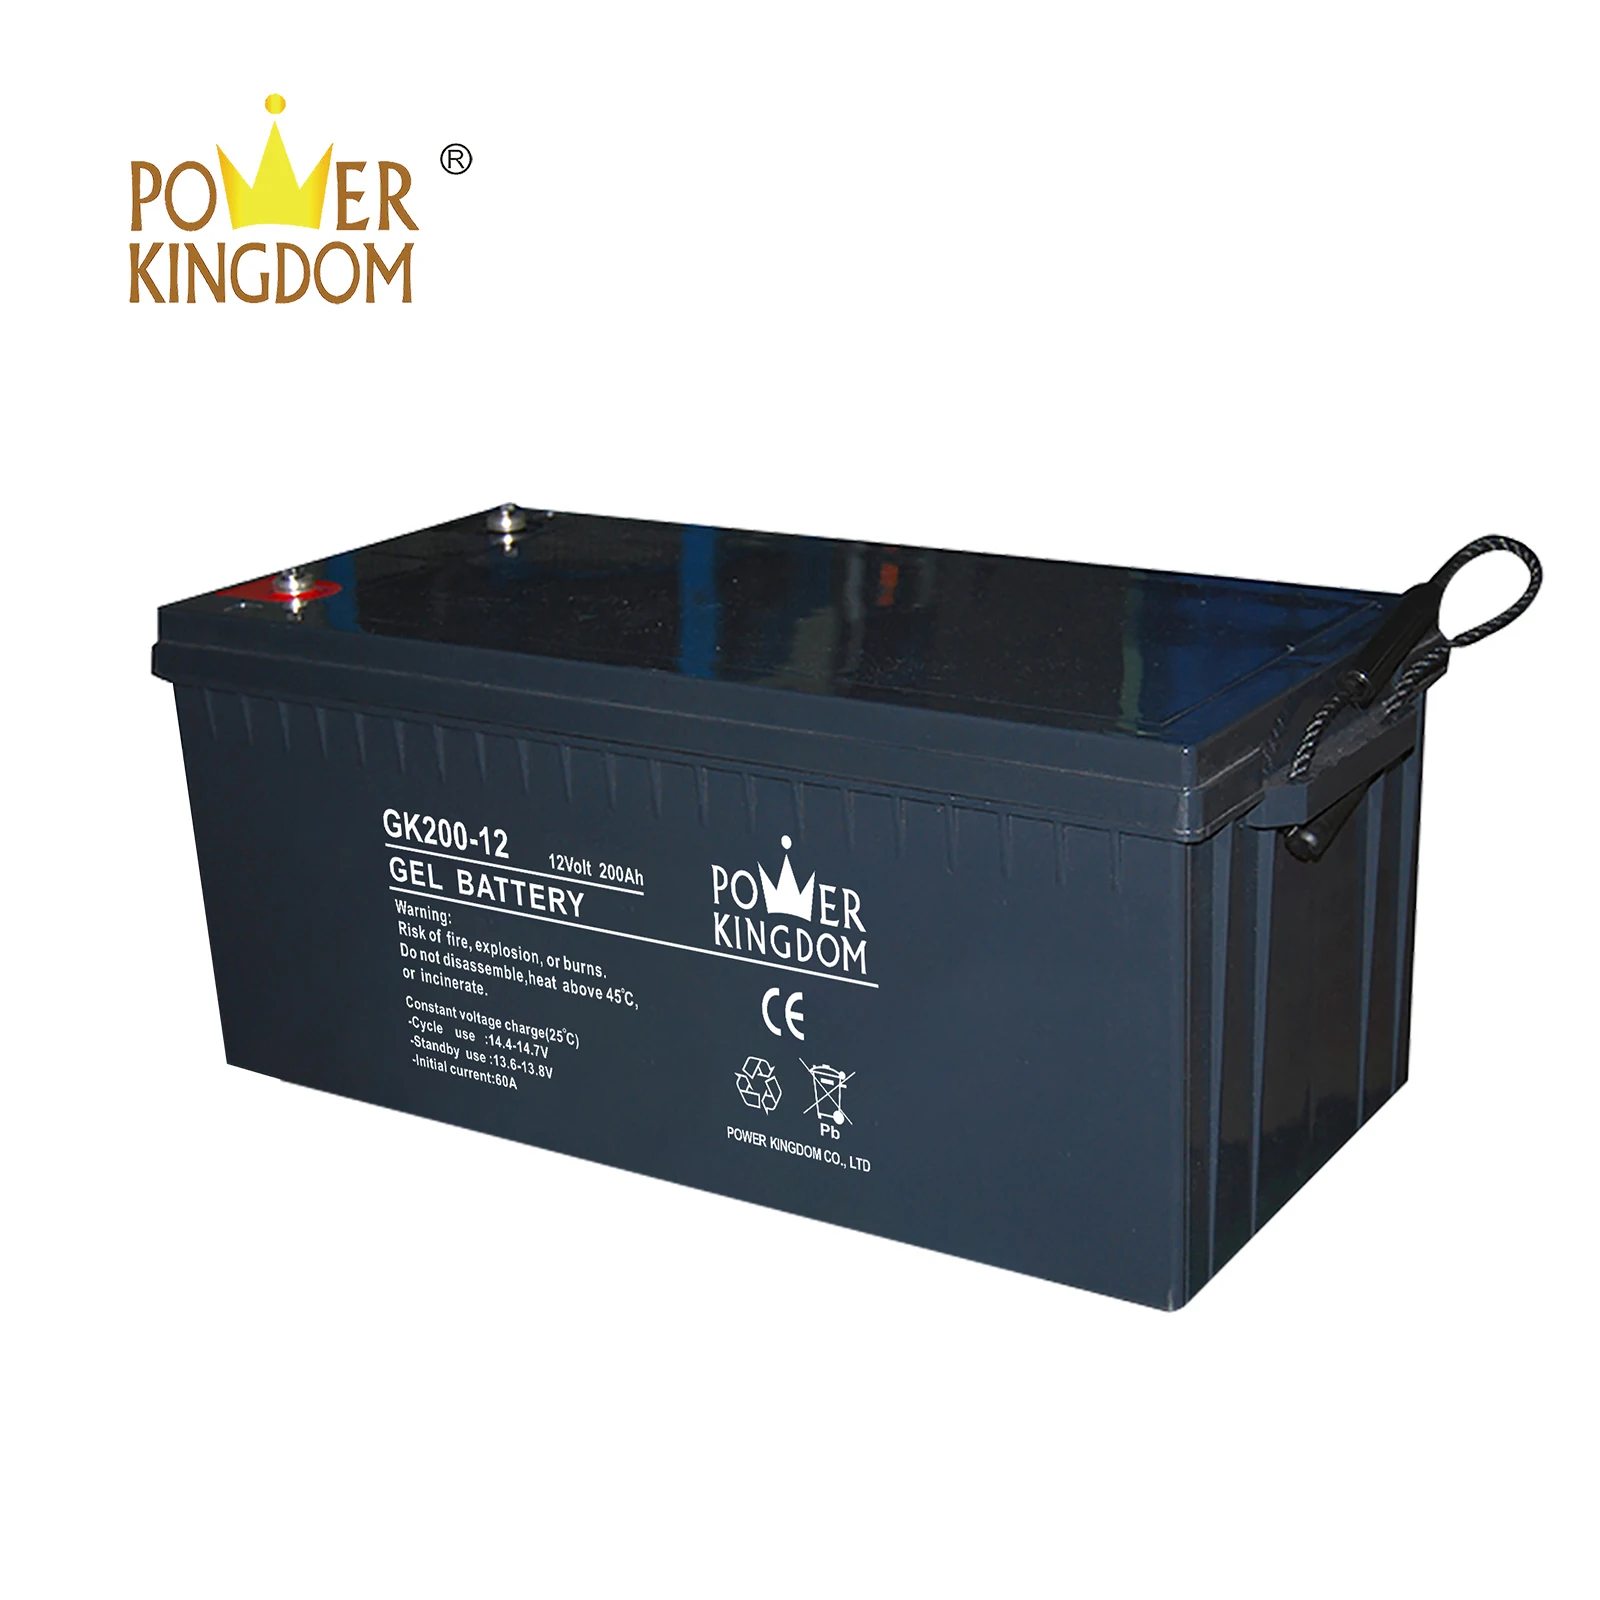 Power Kingdom sealed lead acid rechargeable battery 6v 4ah company solor system-2